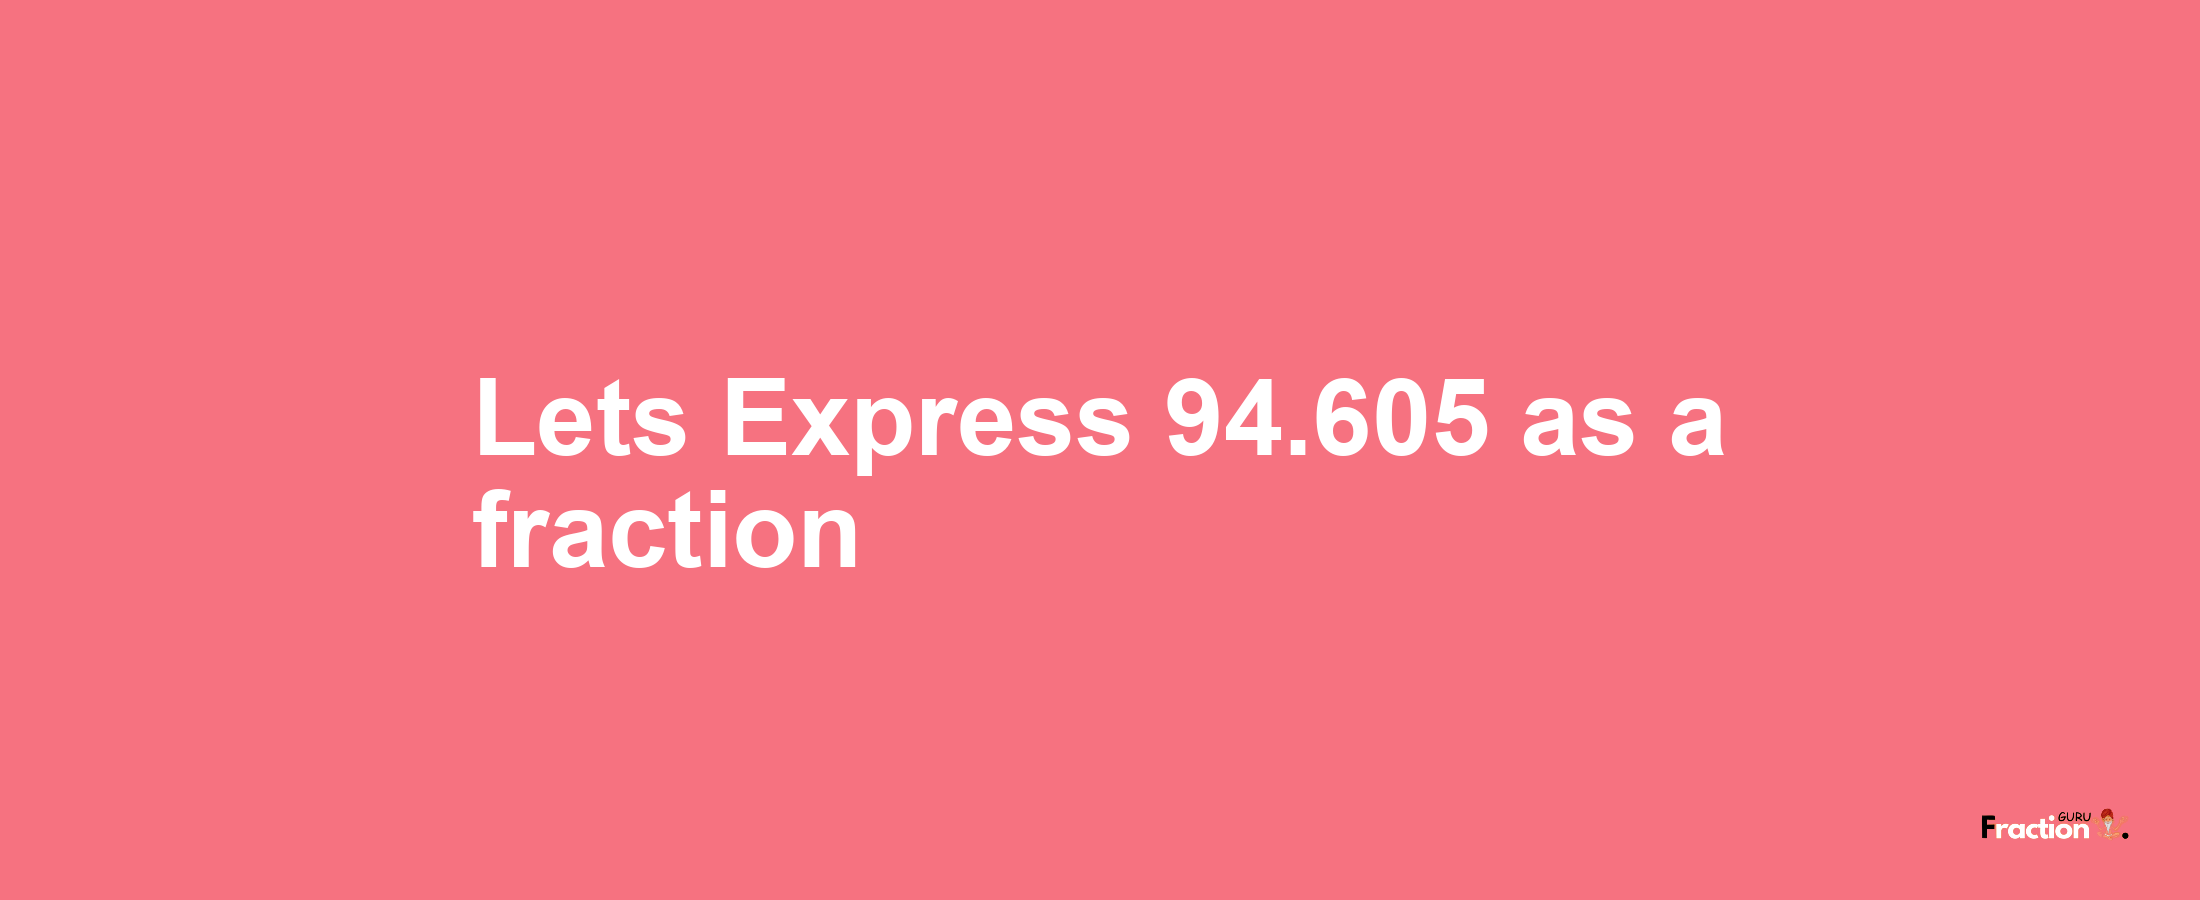 Lets Express 94.605 as afraction